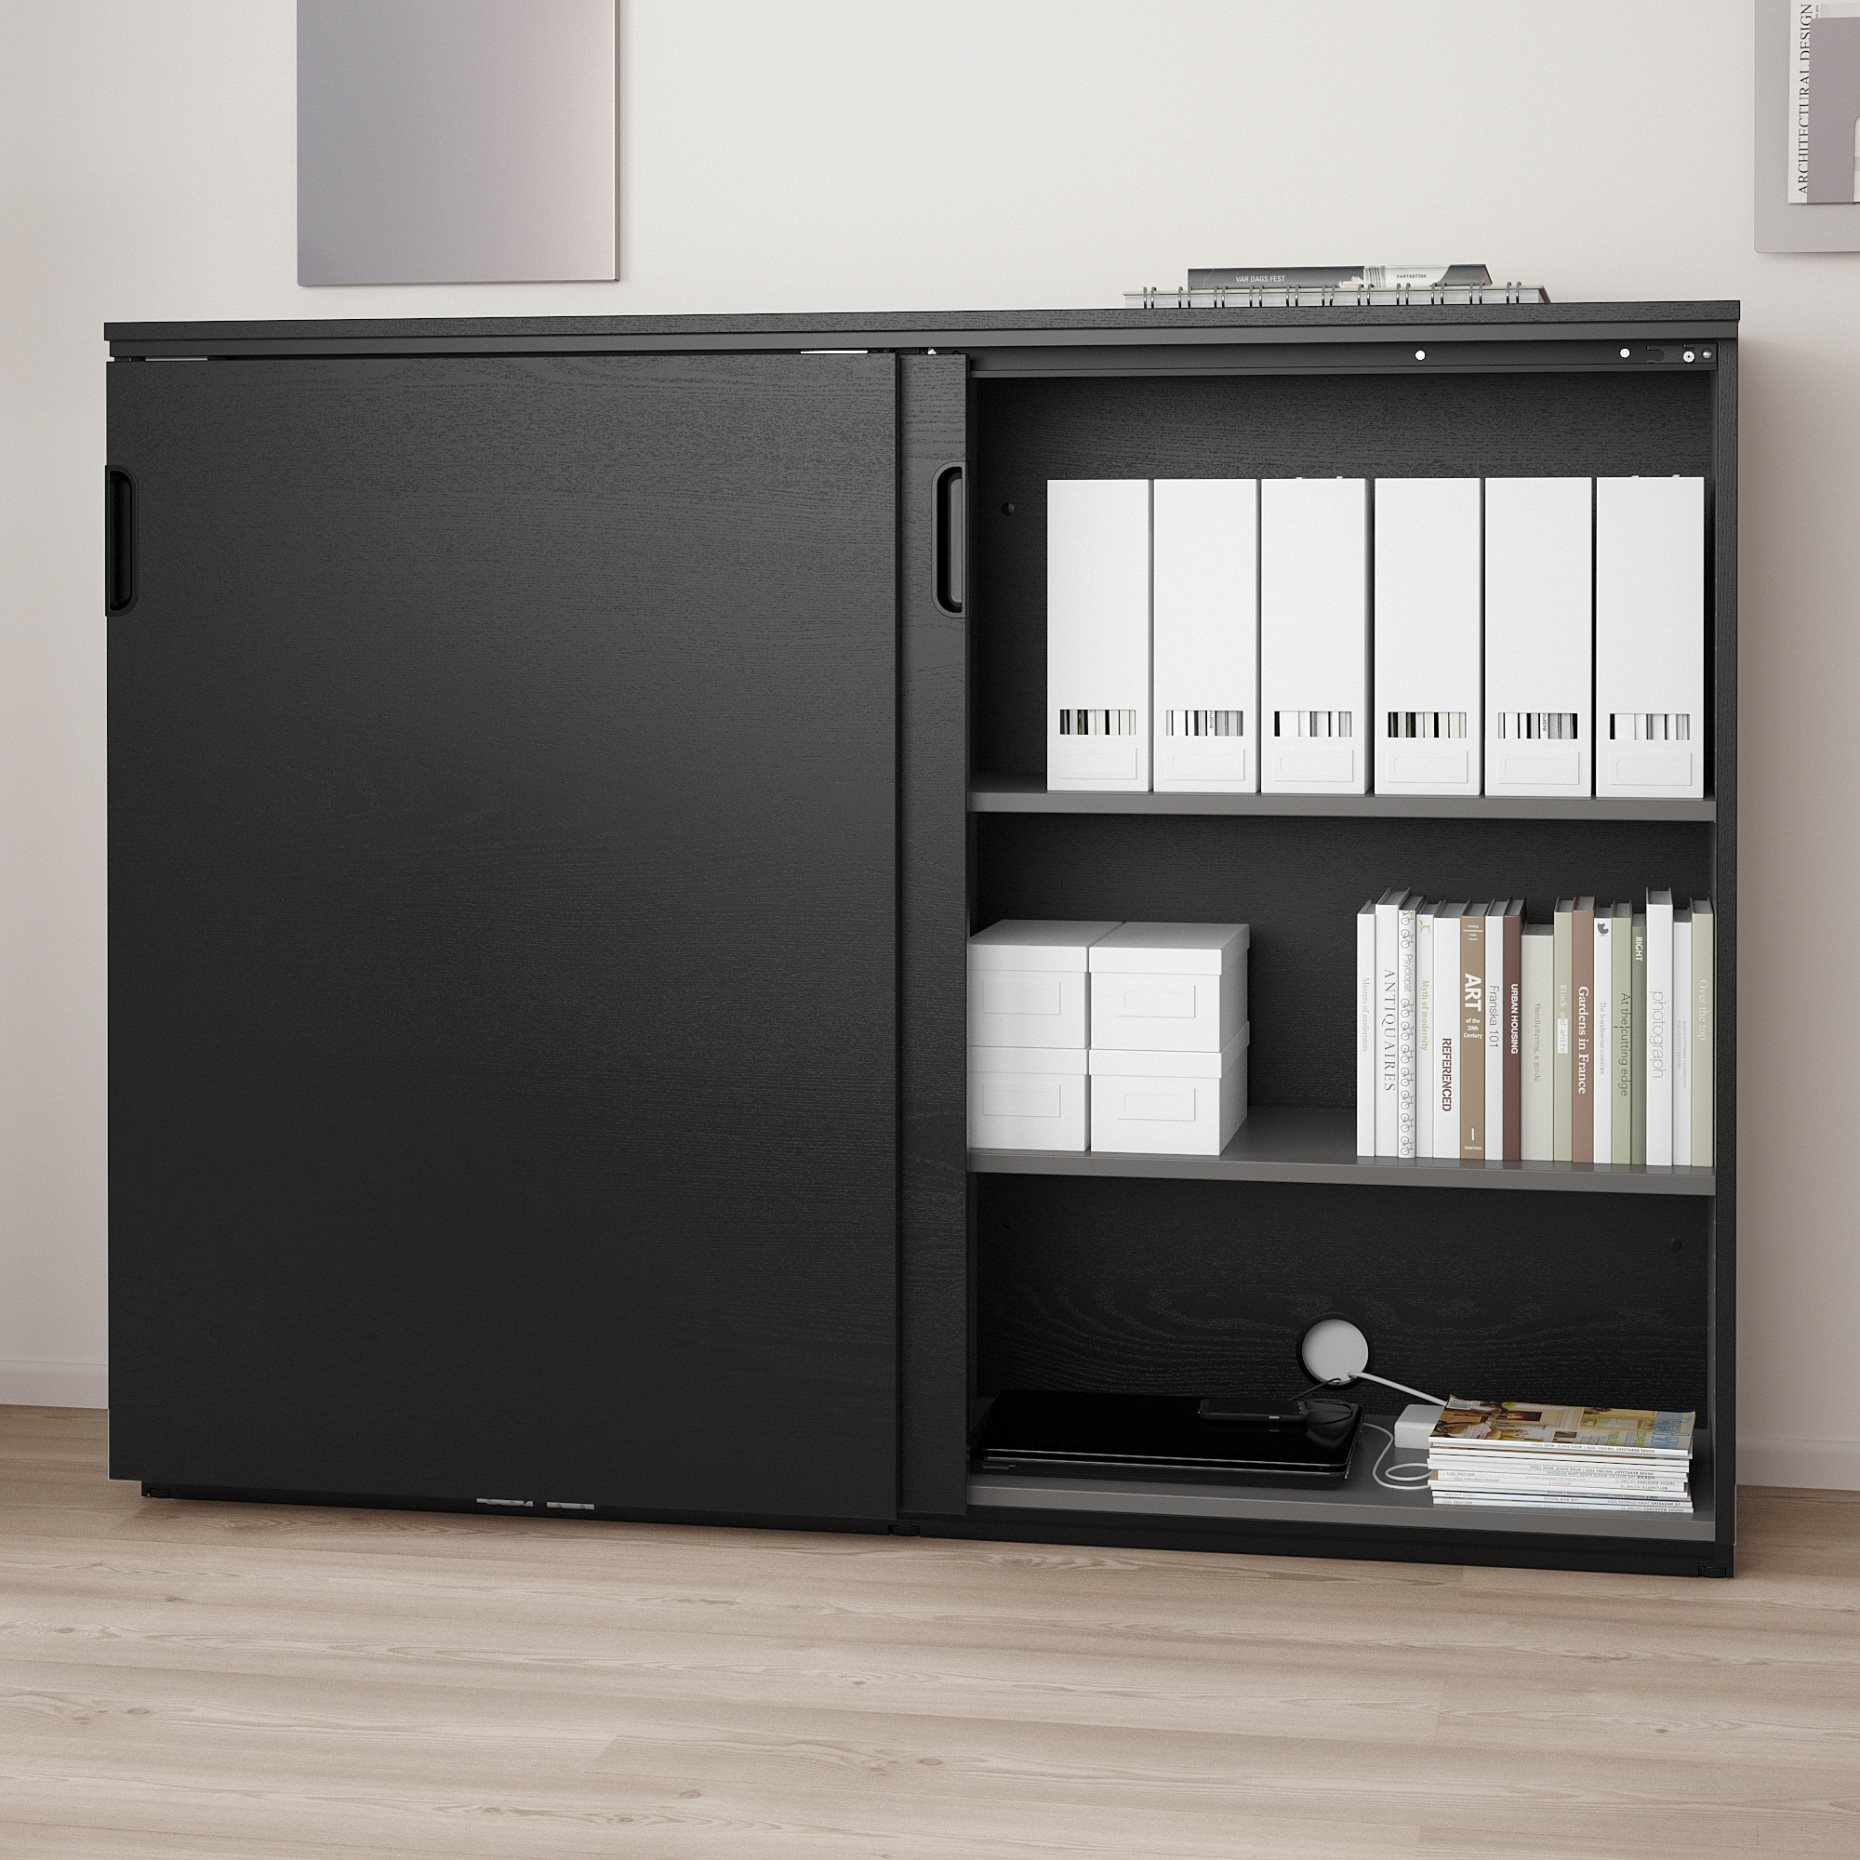 GALANT, cabinet with sliding doors, 203.651.31